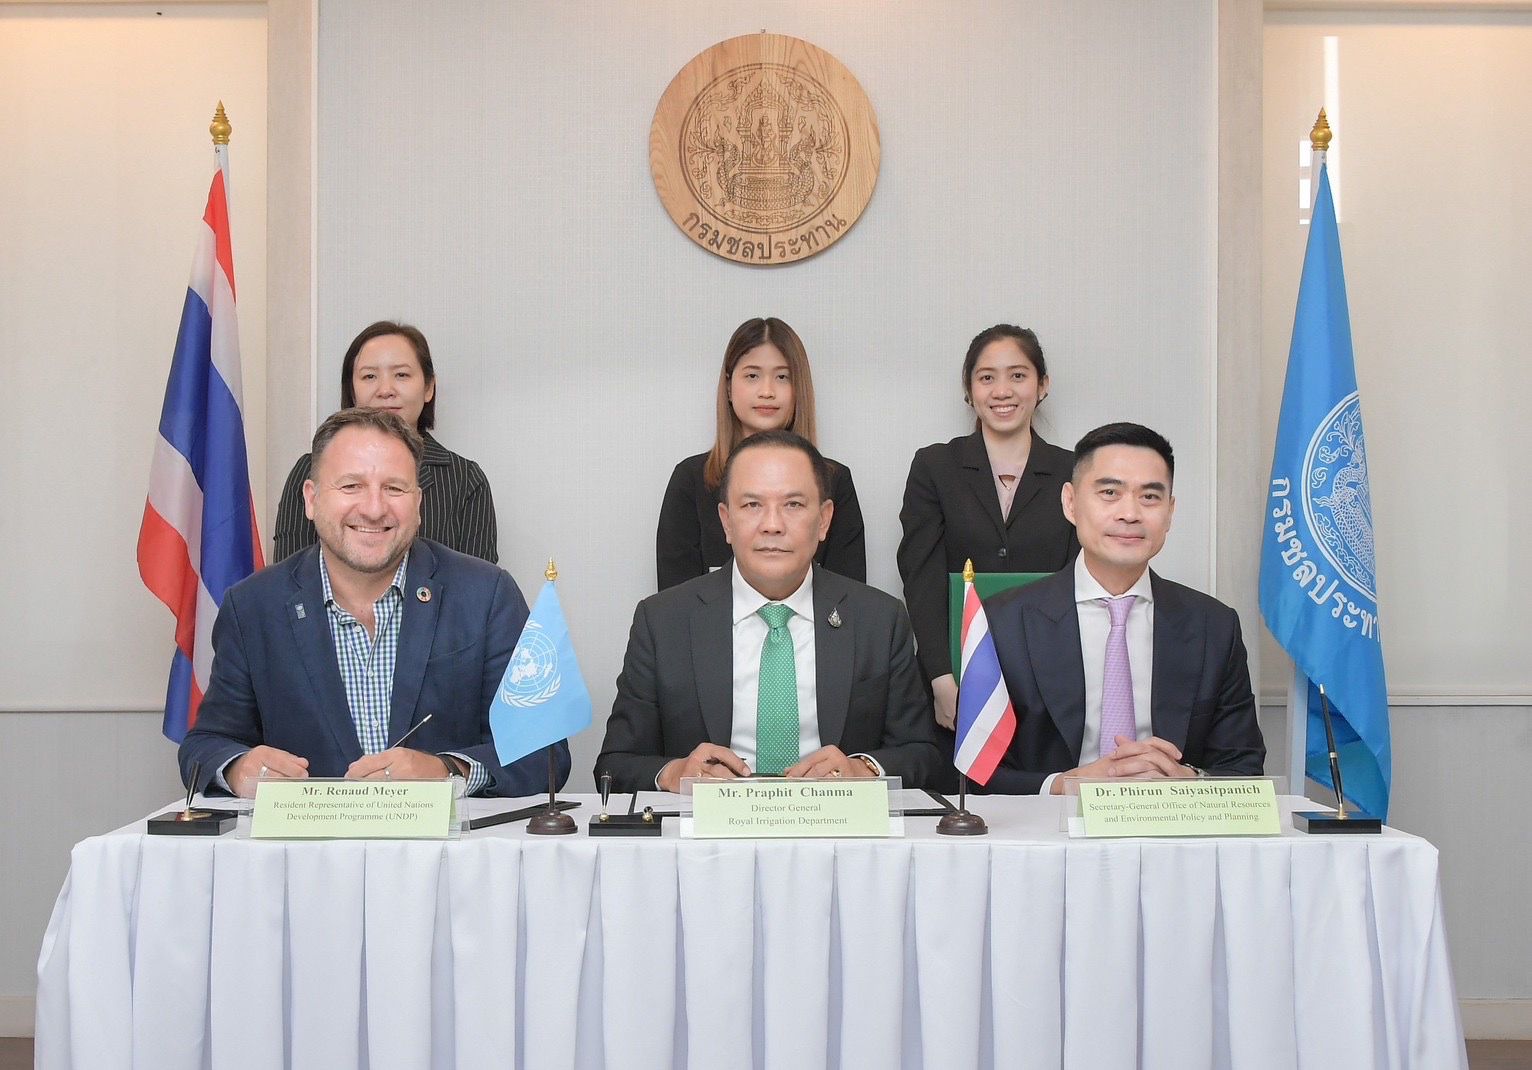 Representatives from partner organizations sign agreement for new project 